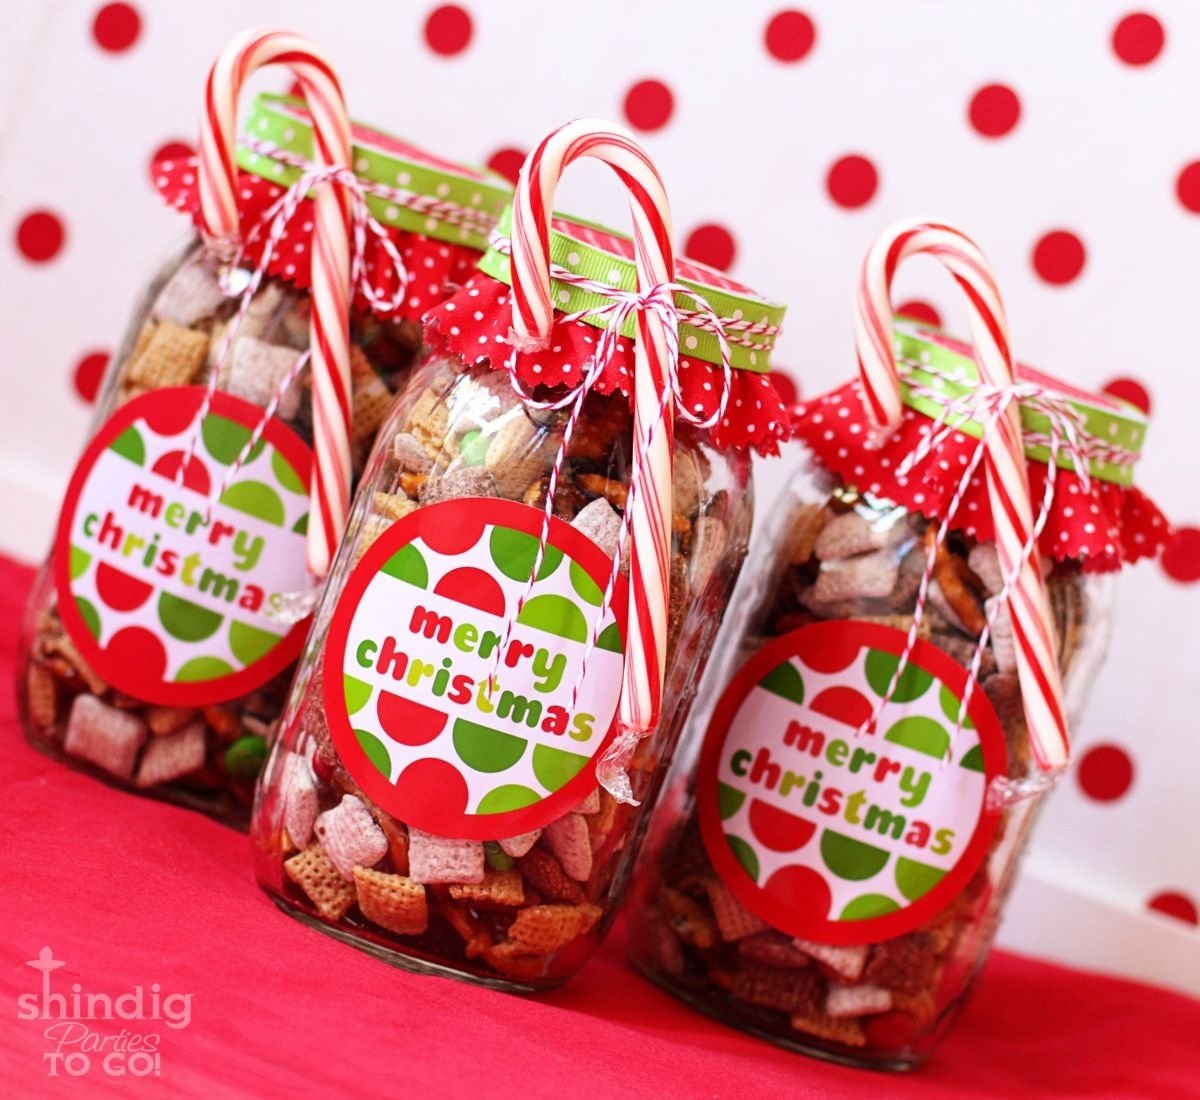 10 Lovable Christmas Gift Ideas To Make amandas parties to go free merry christmas tags and gift idea 7 2022